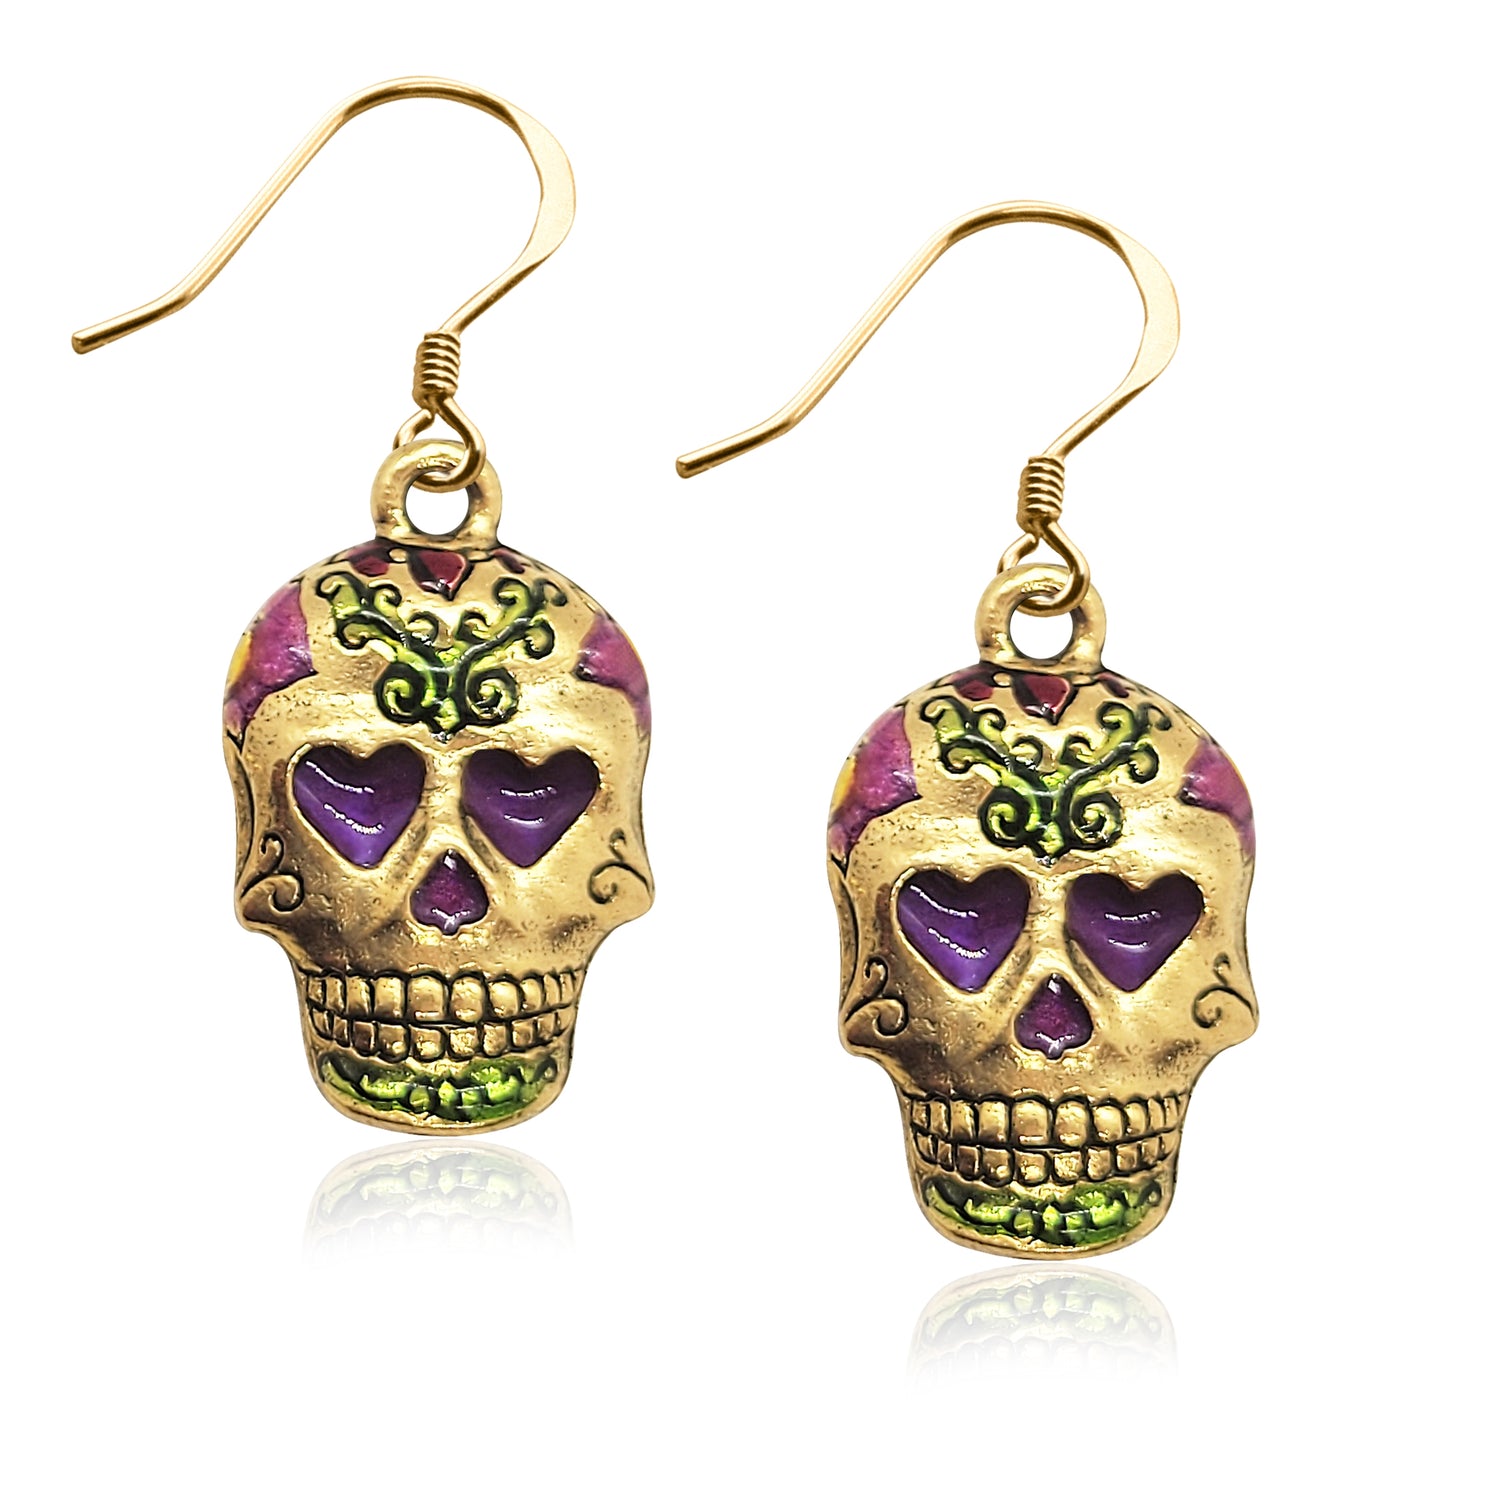 Whimsical Gifts | Day of the Dead | Dia De Los Muertos | Skull Charm Earrings in Gold Finish | Holiday & Seasonal Themed | Other Holidays | Jewelry